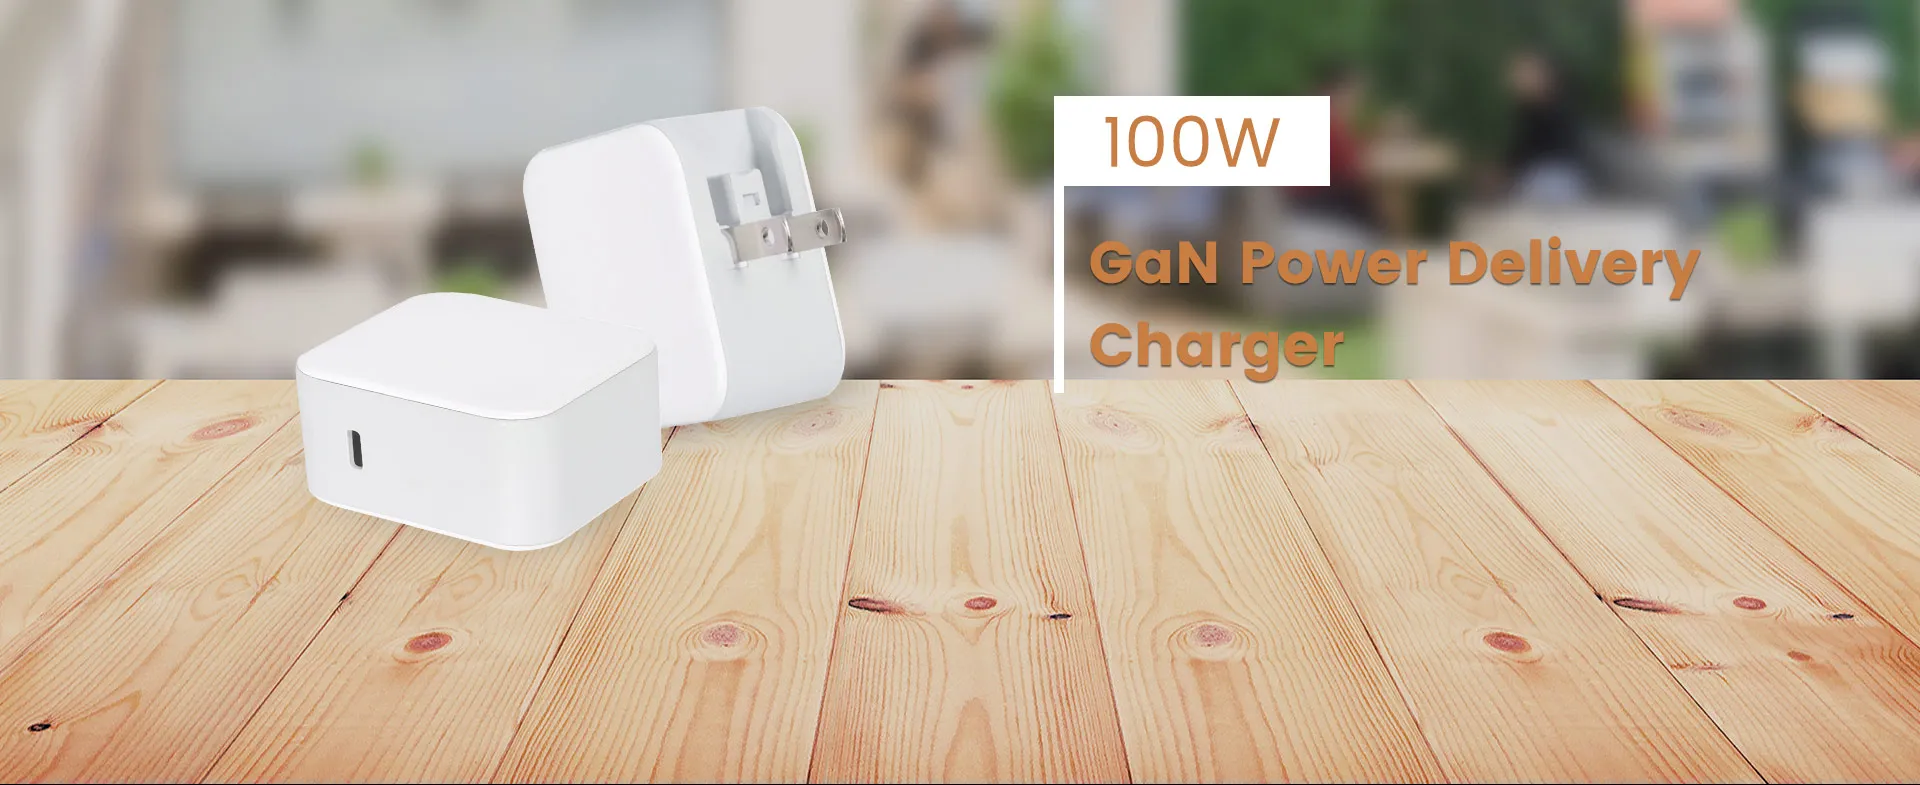 100W GaN Power Delivery Charger